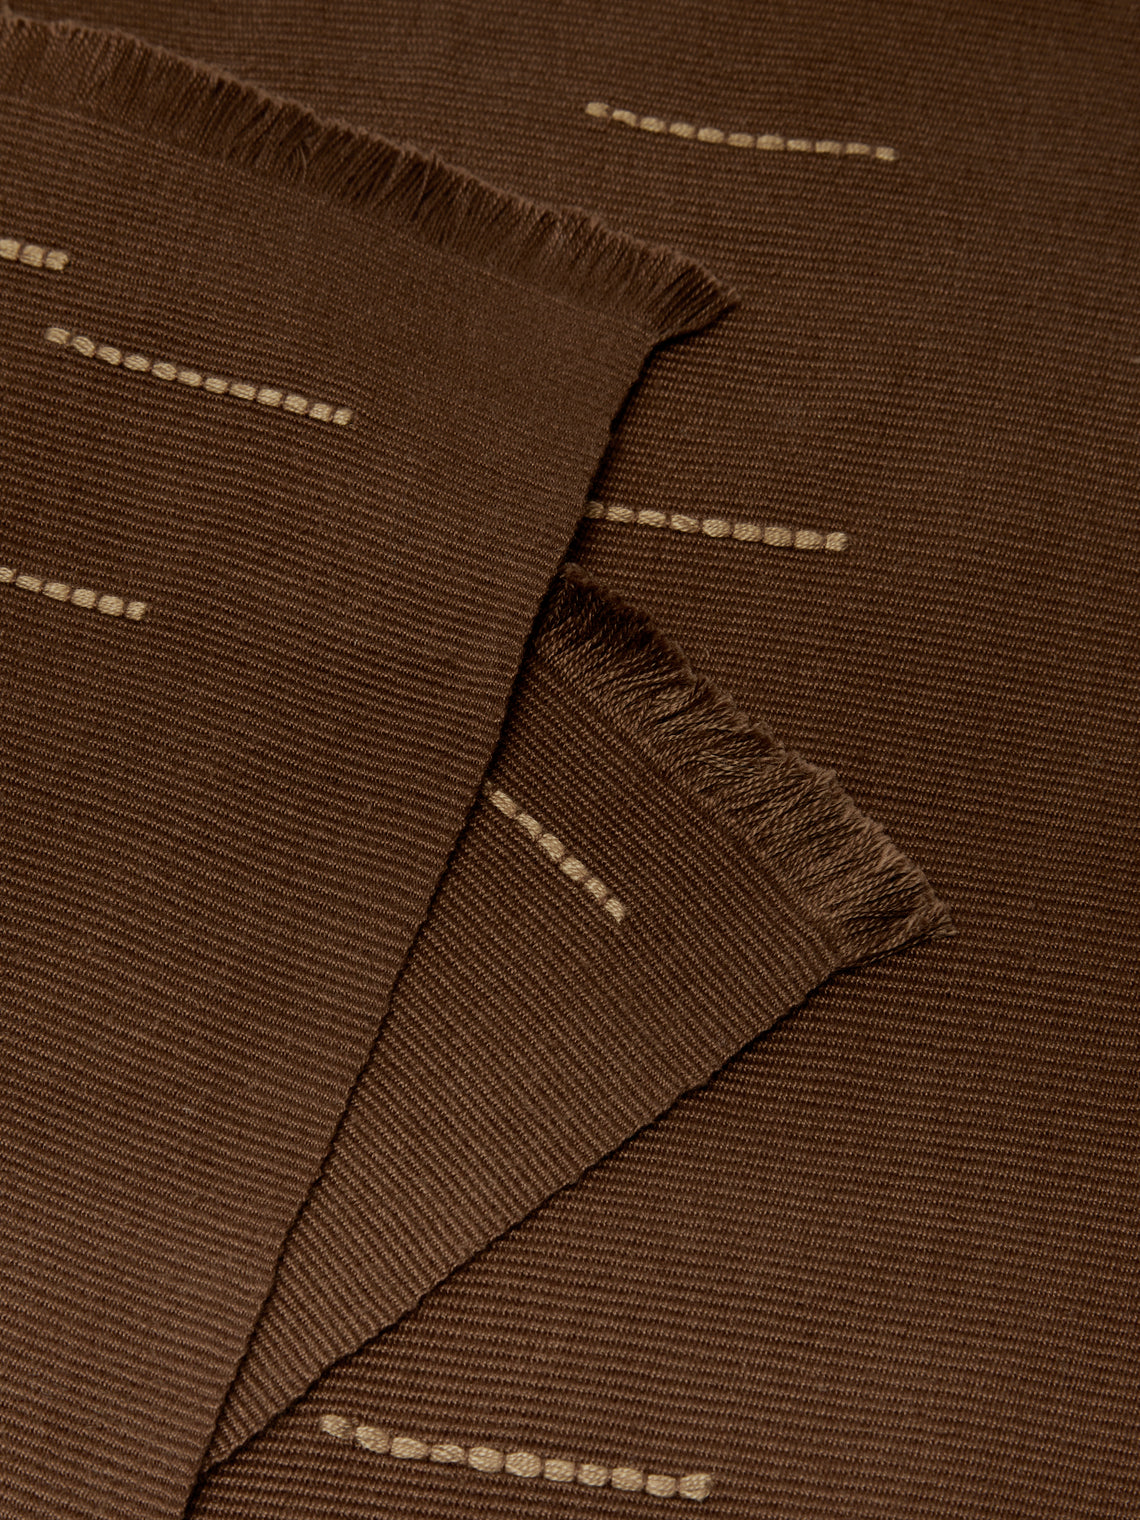 Revolution of Forms - Chiapas Handwoven Cotton Placemats (Set of 4) - Brown - ABASK